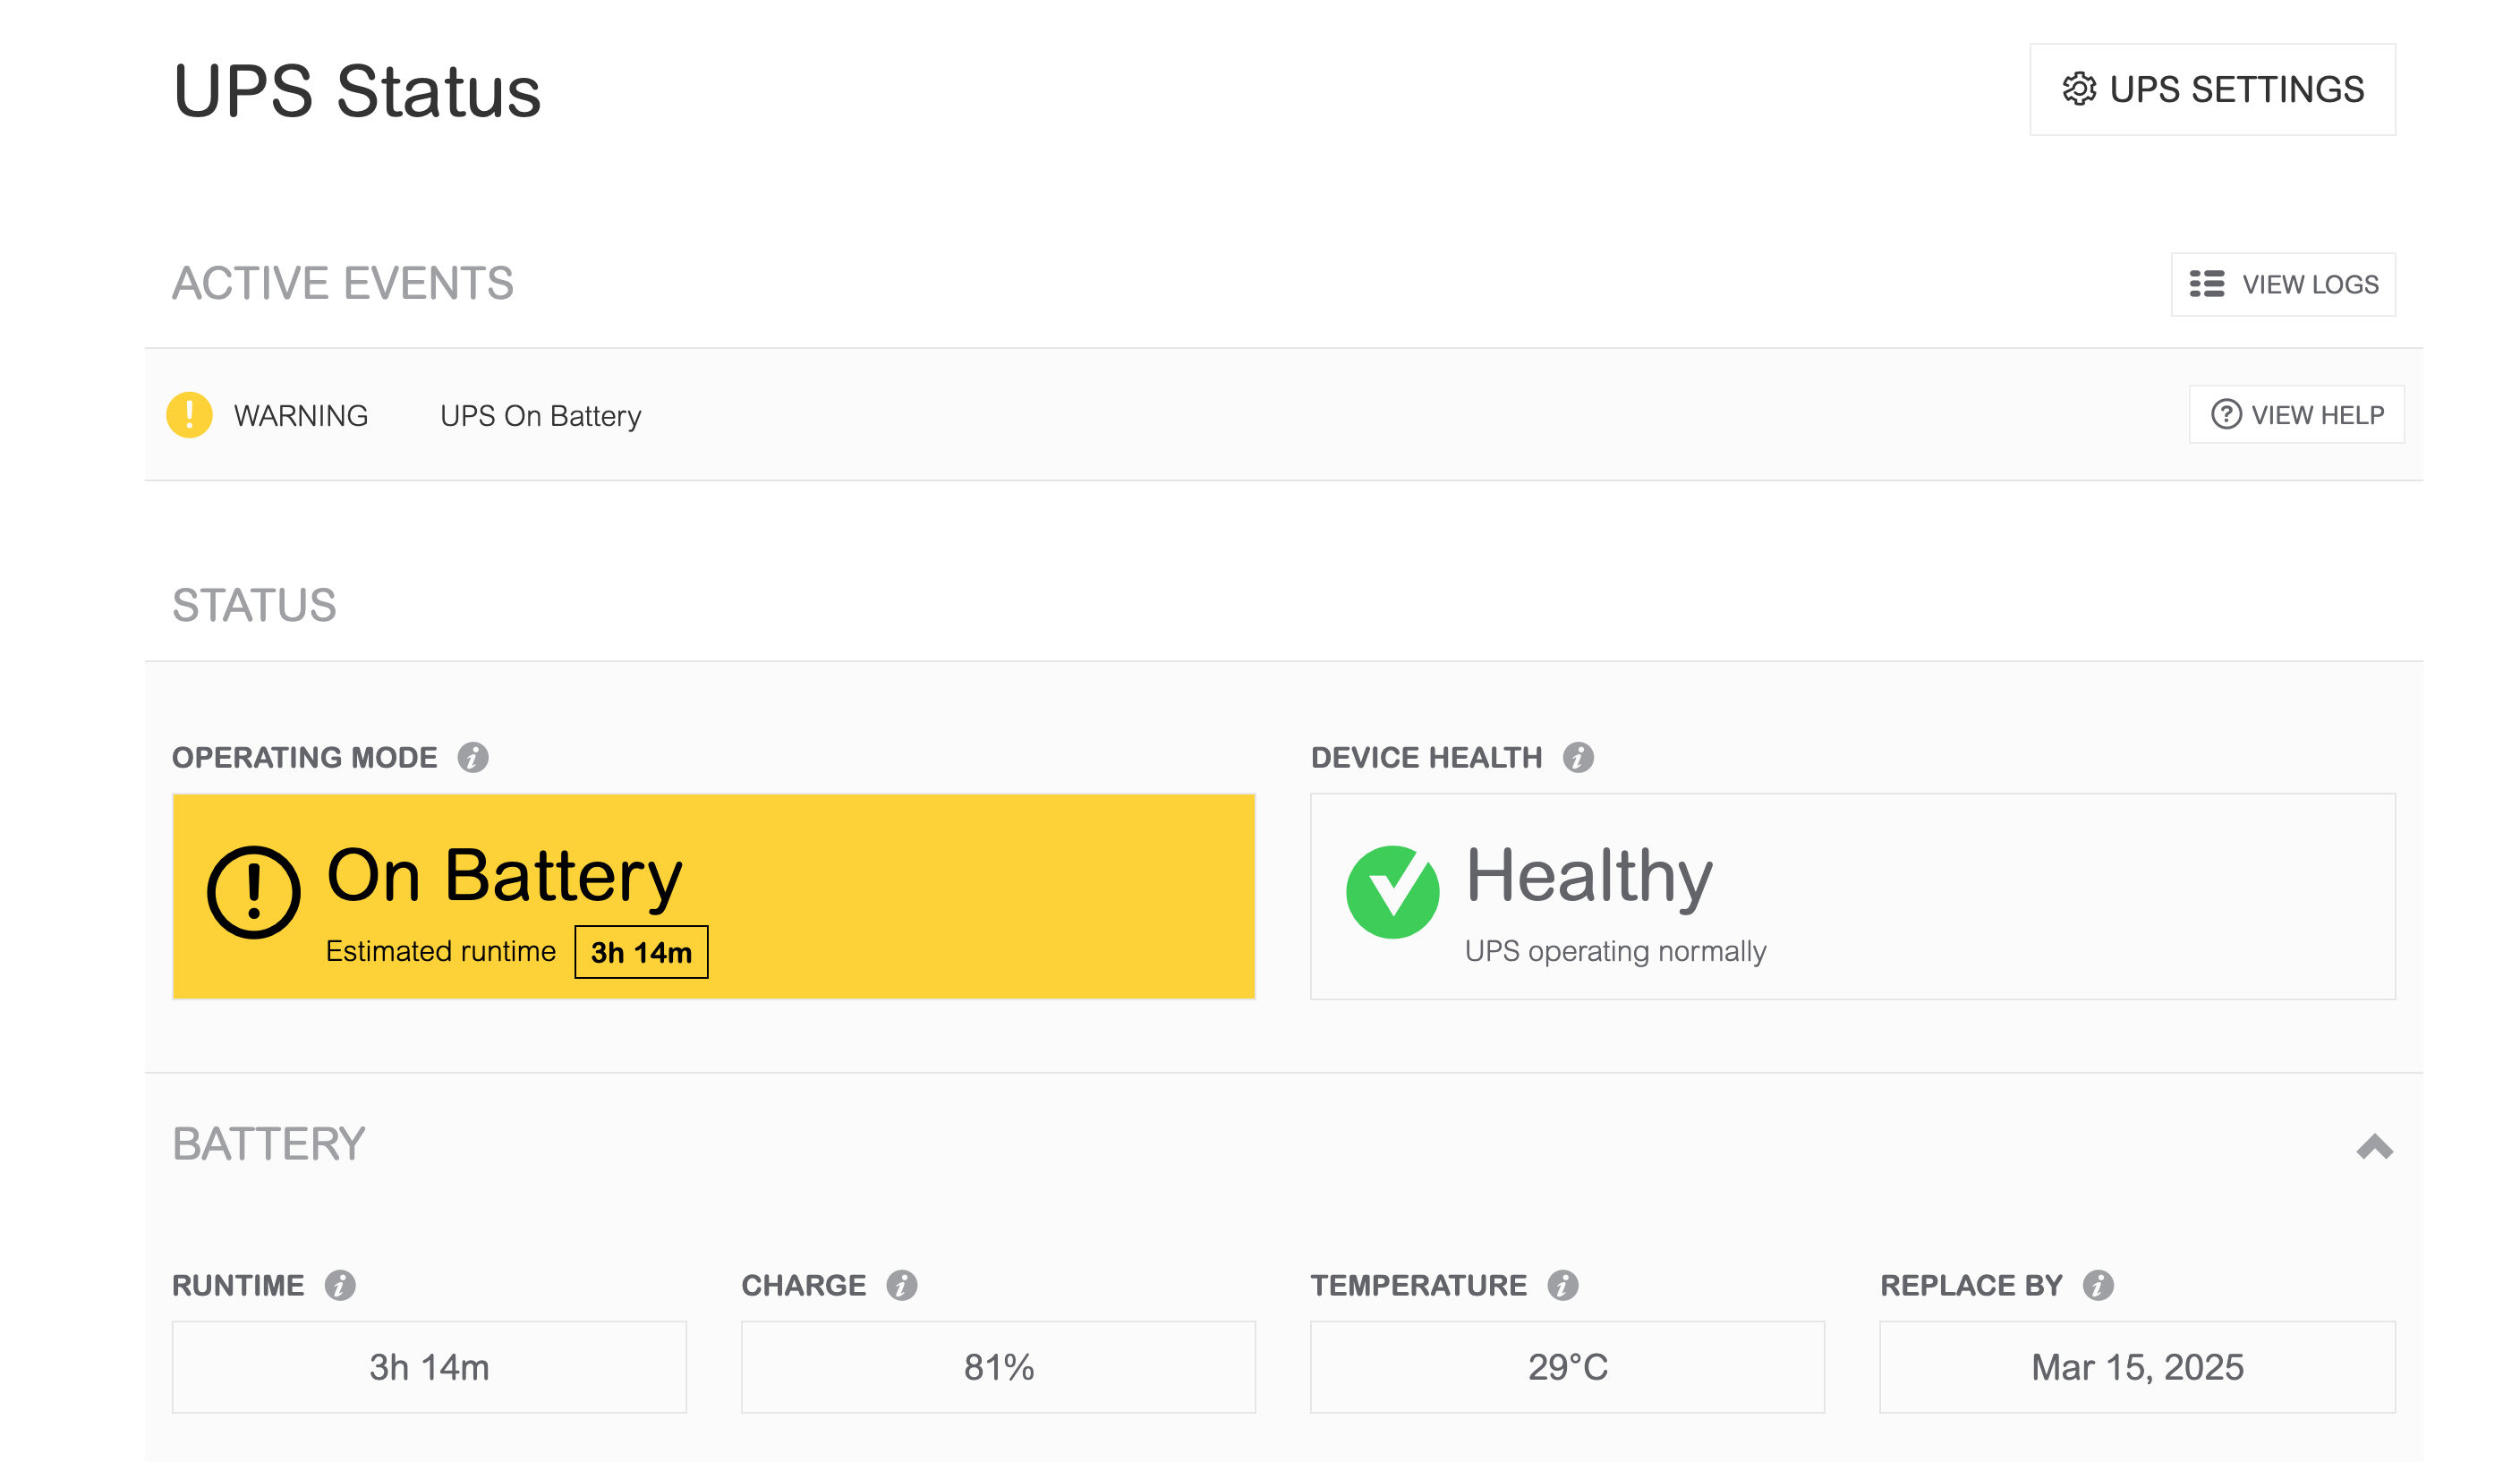 The UPS's warning status showing via the "cloud enabled" feature on APC's website when the UPS is in battery mode